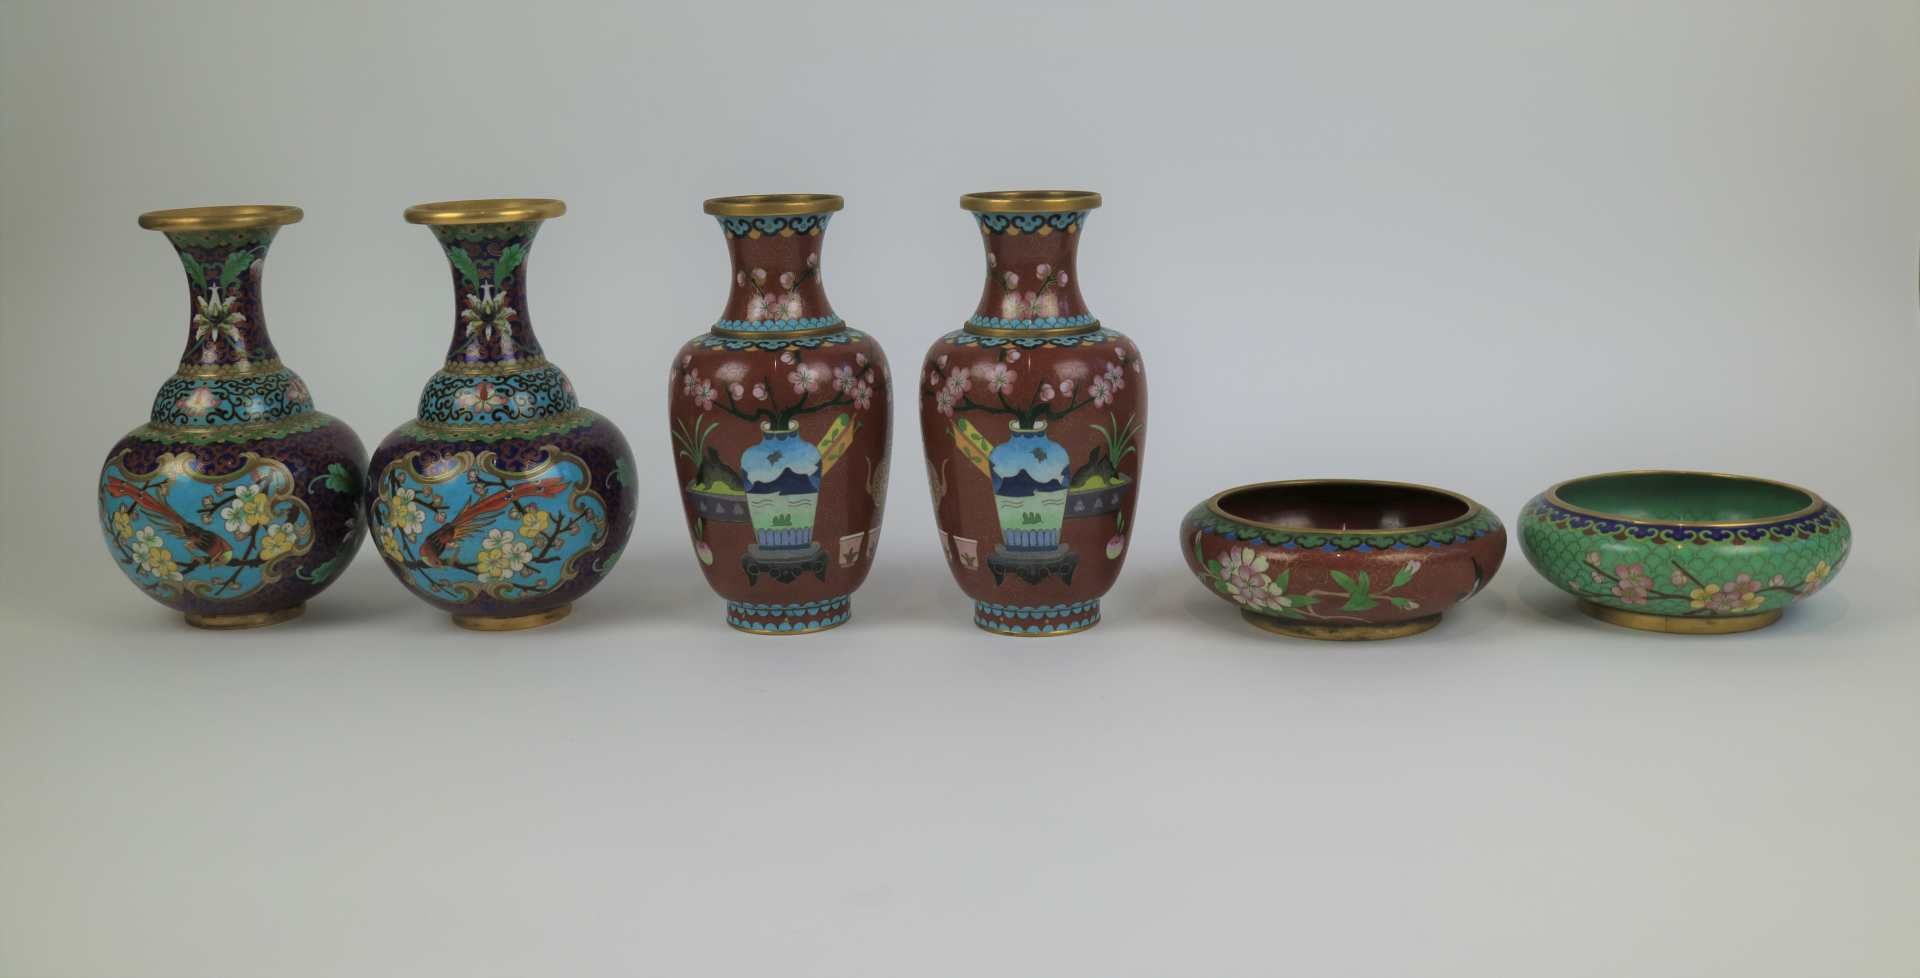 Lot of 4 Chinese cloisonné vases and 2 bowls